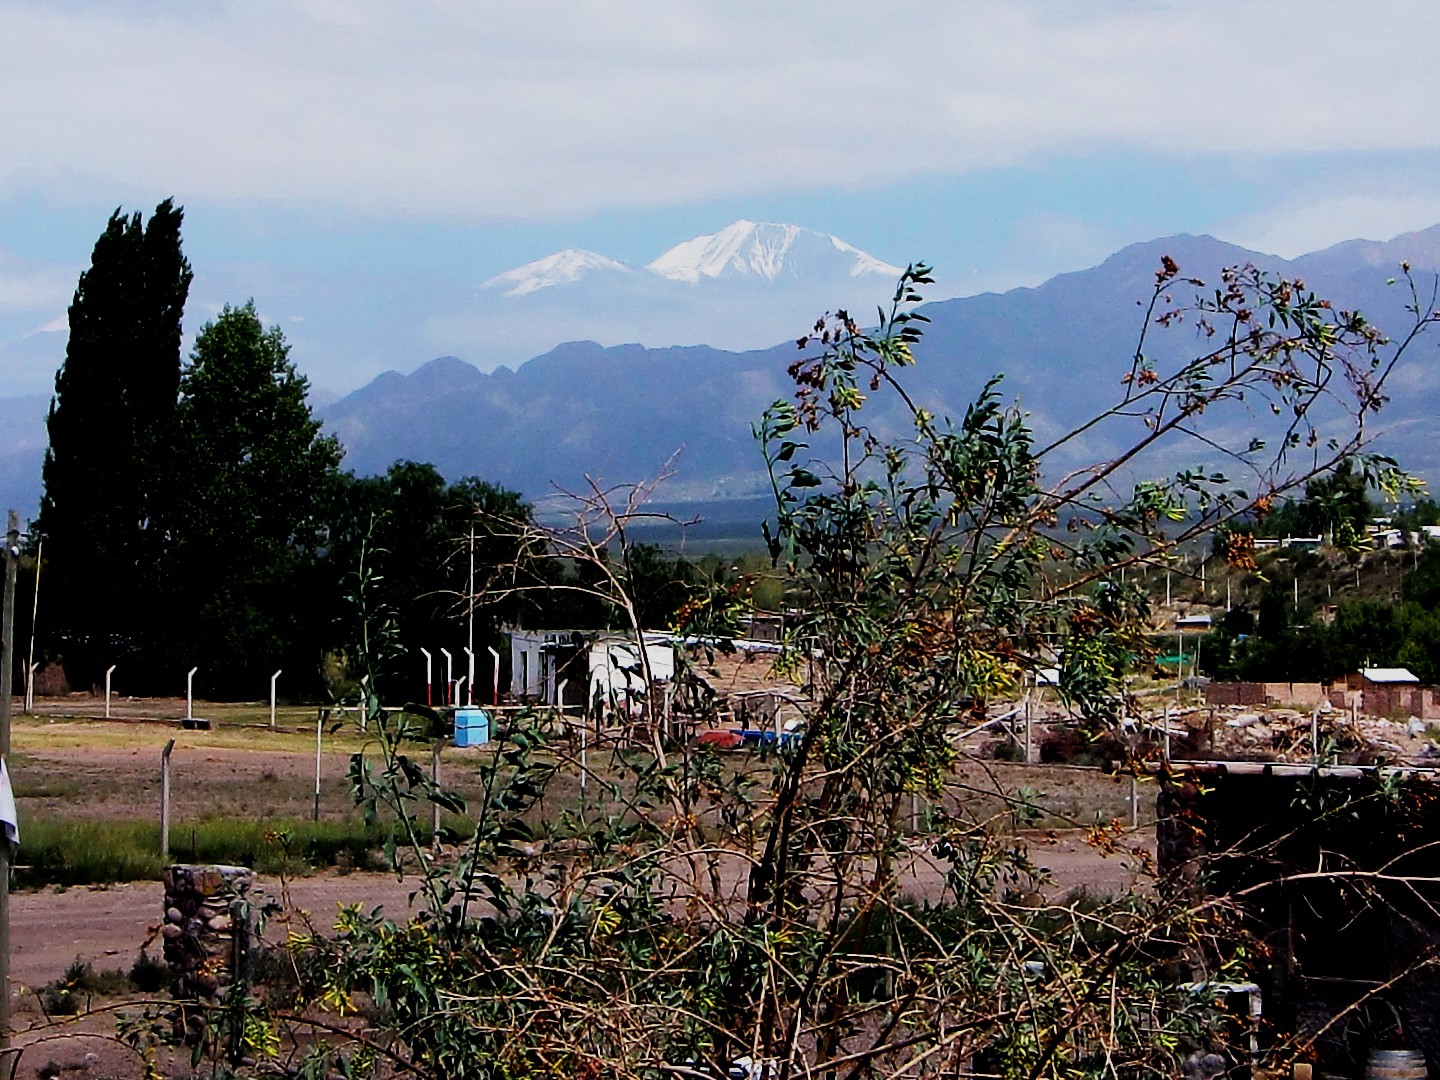 Cerro Plata from the outskirts of Mendoza - More than 5000 meters vertical distance!